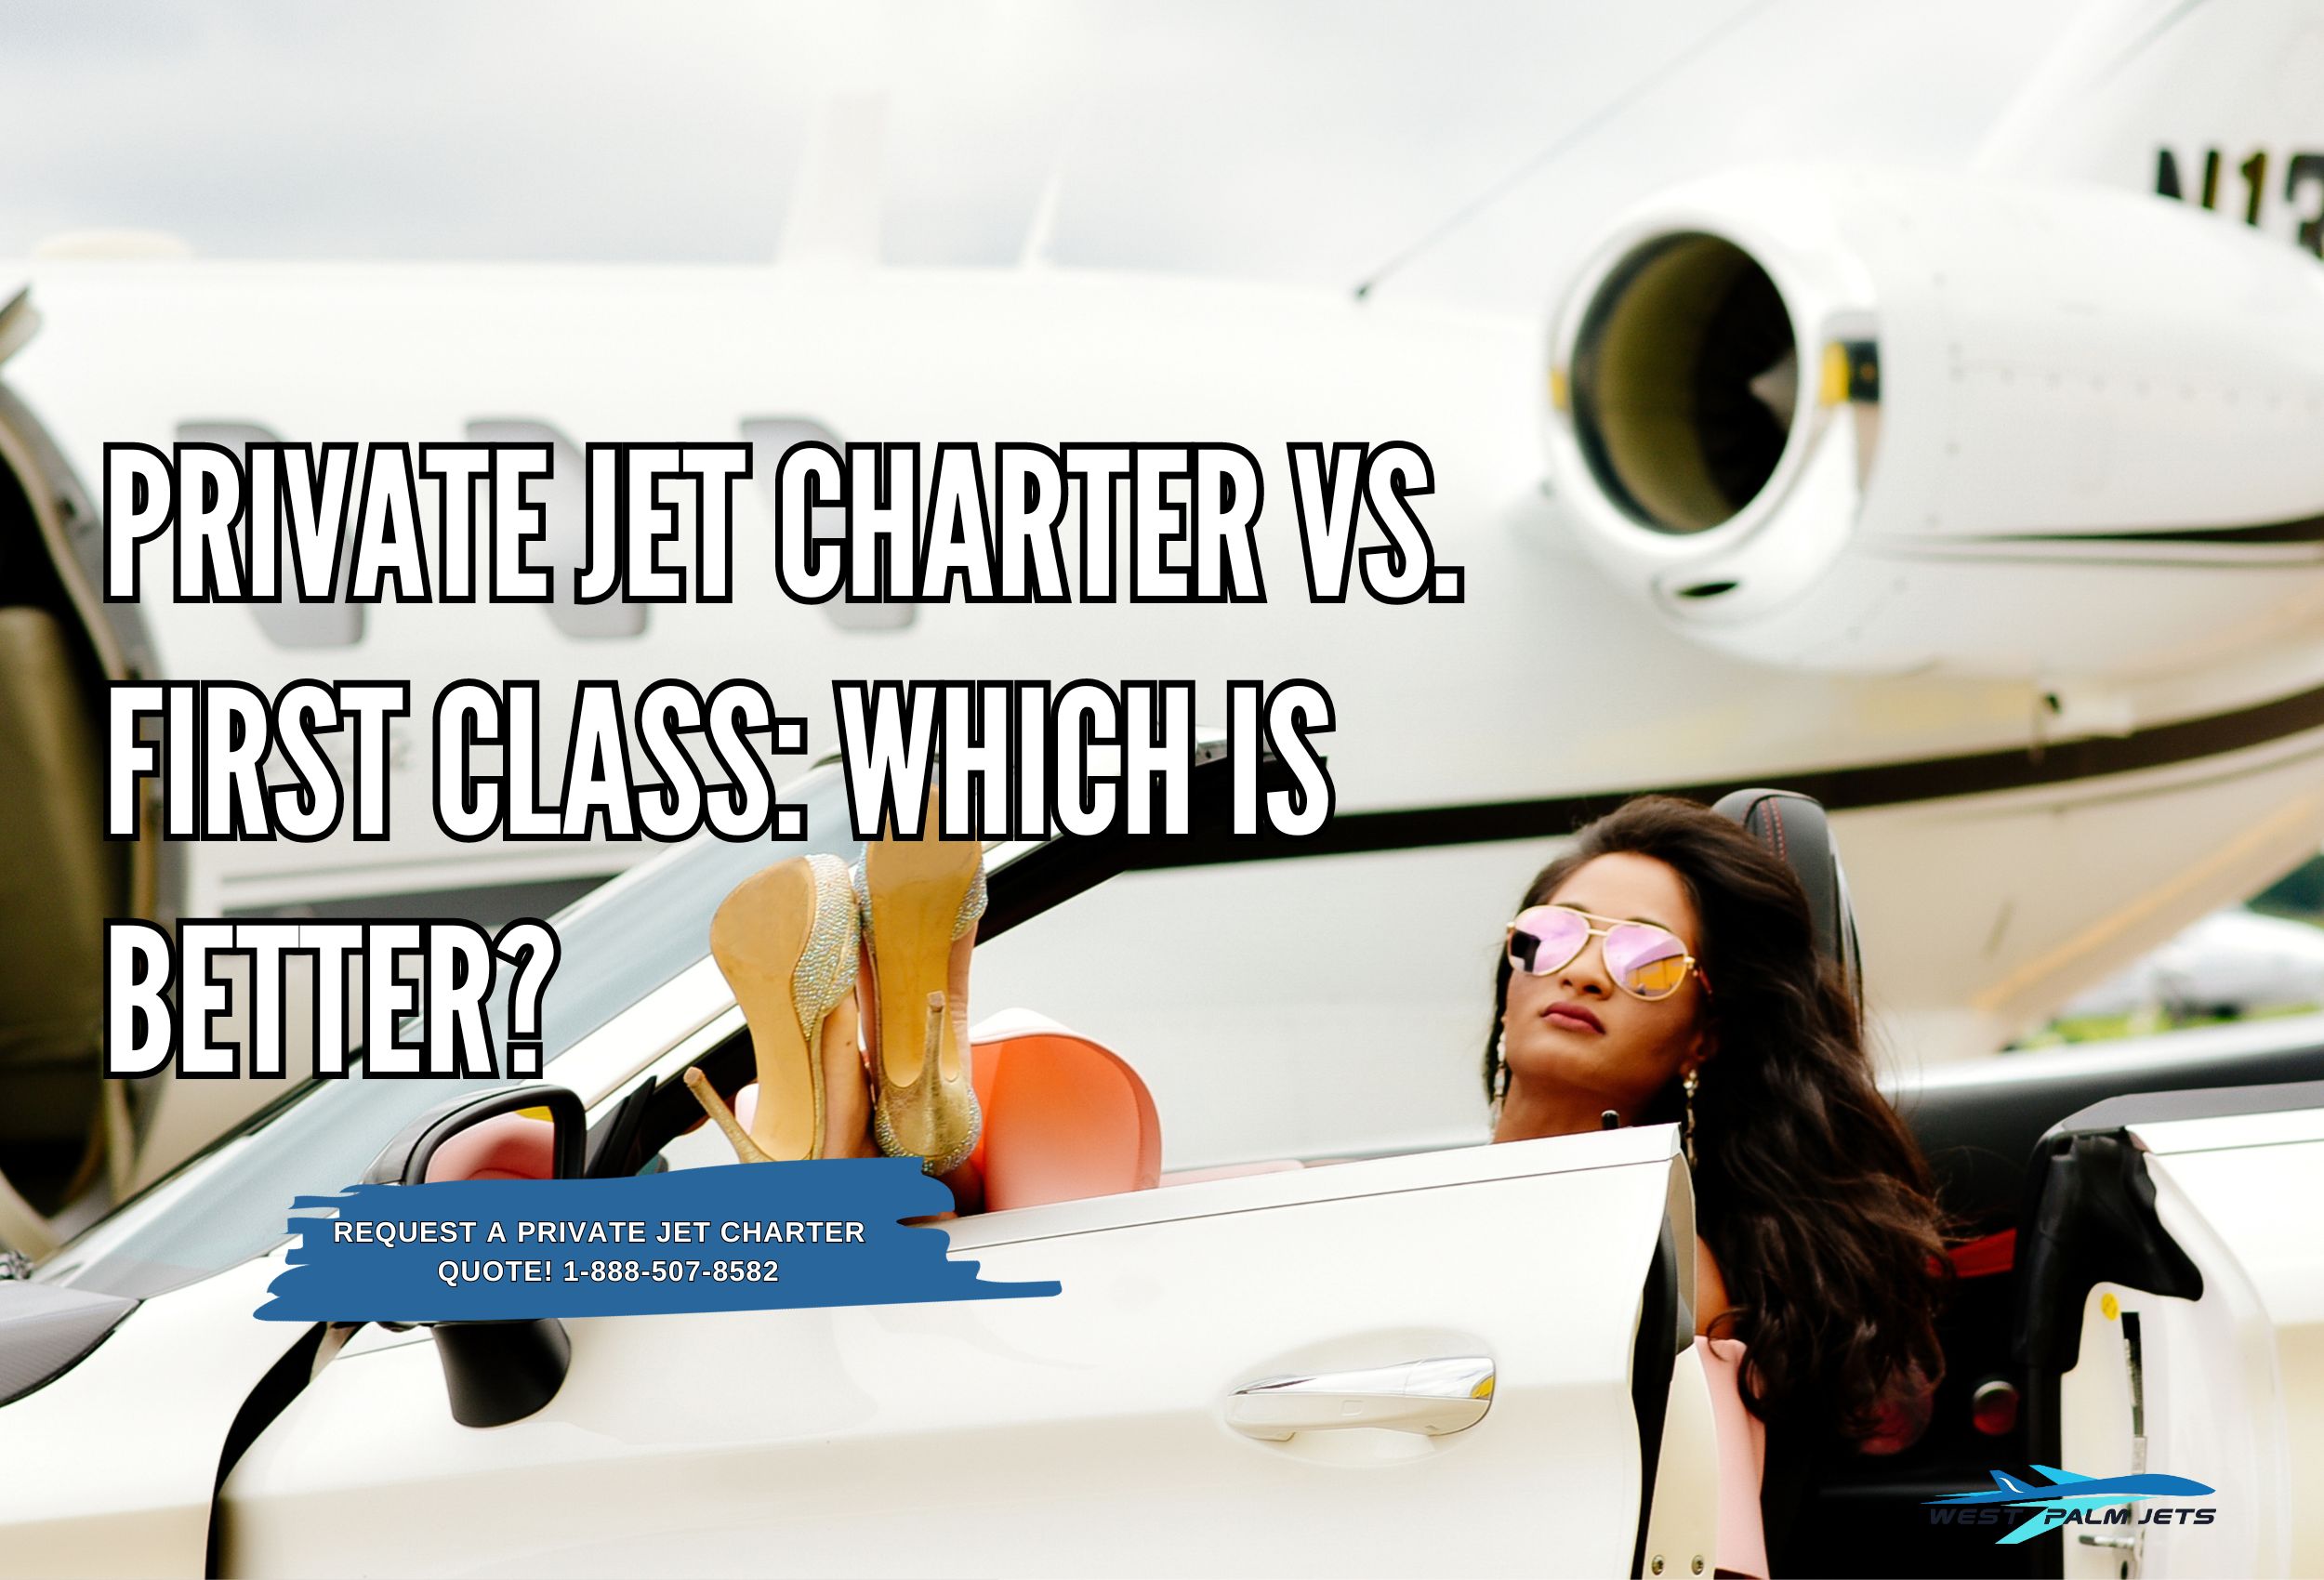 Private Jet Charter vs. First Class Which Is Better